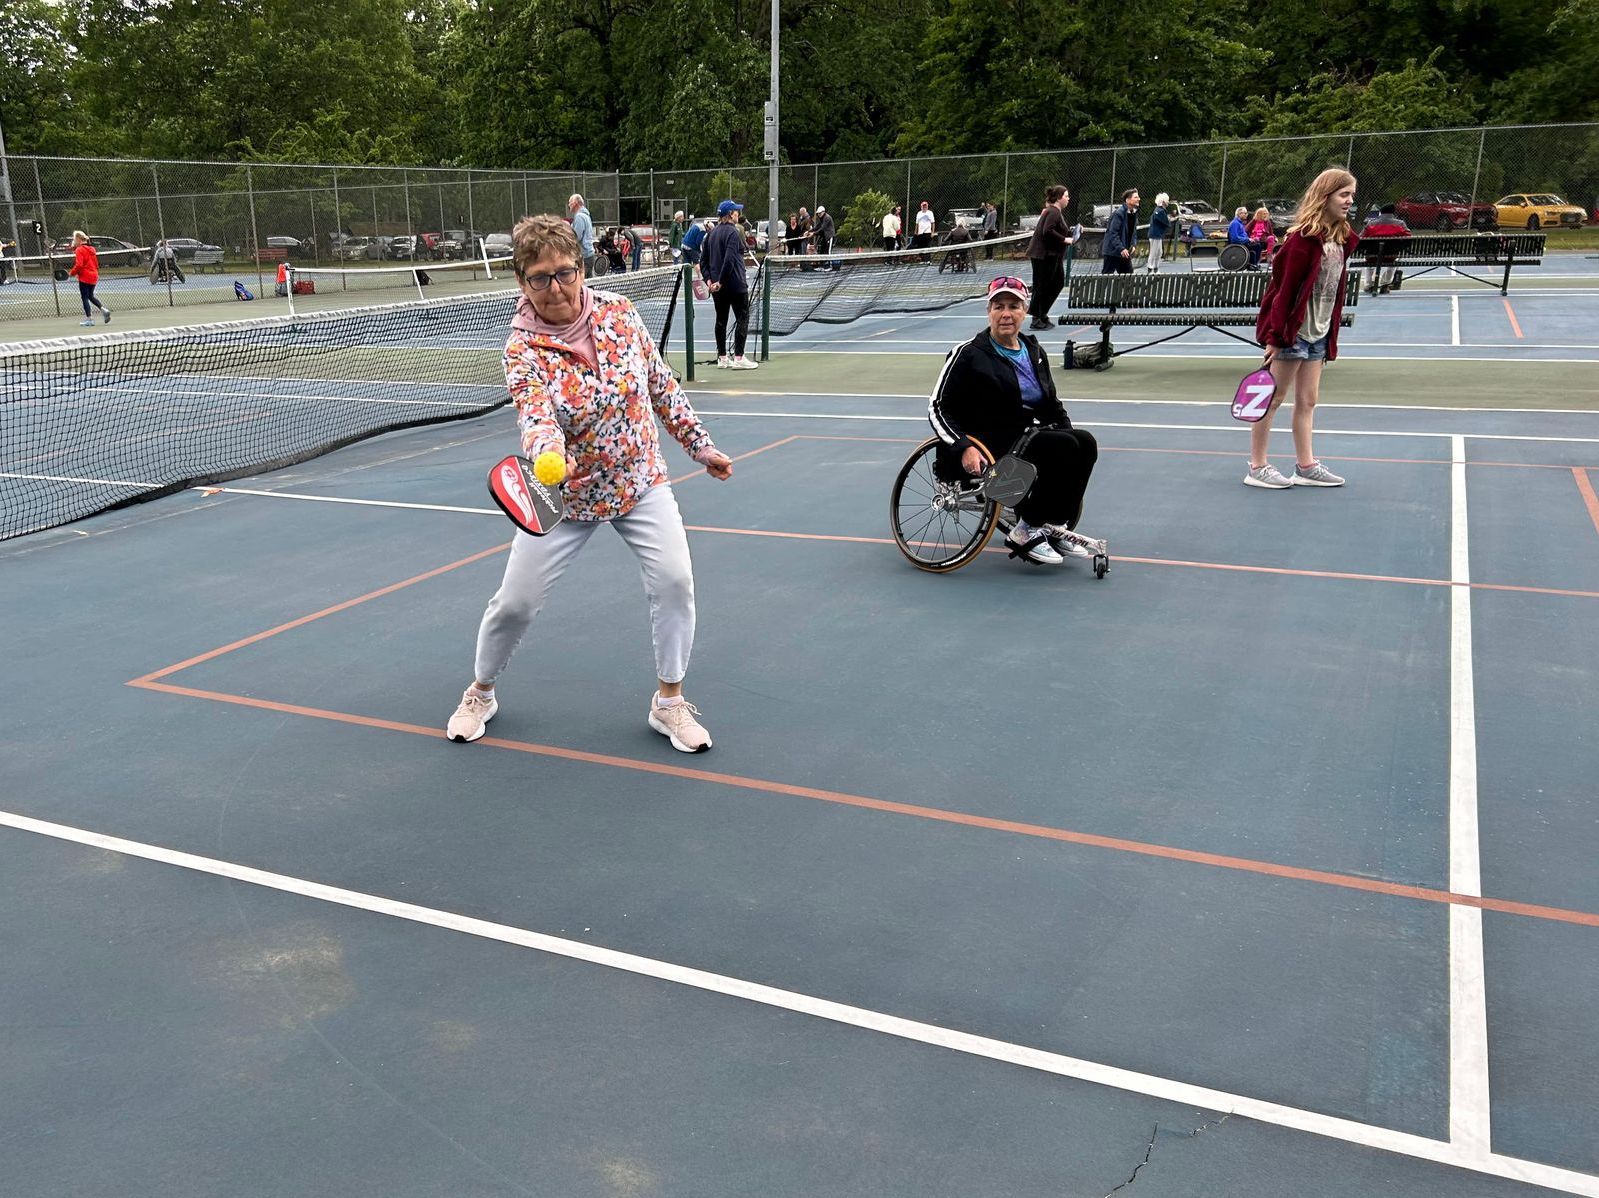 Image shows people playing pickleball; a person standing is about to hit the ball while a wheelchair user looks on, ready